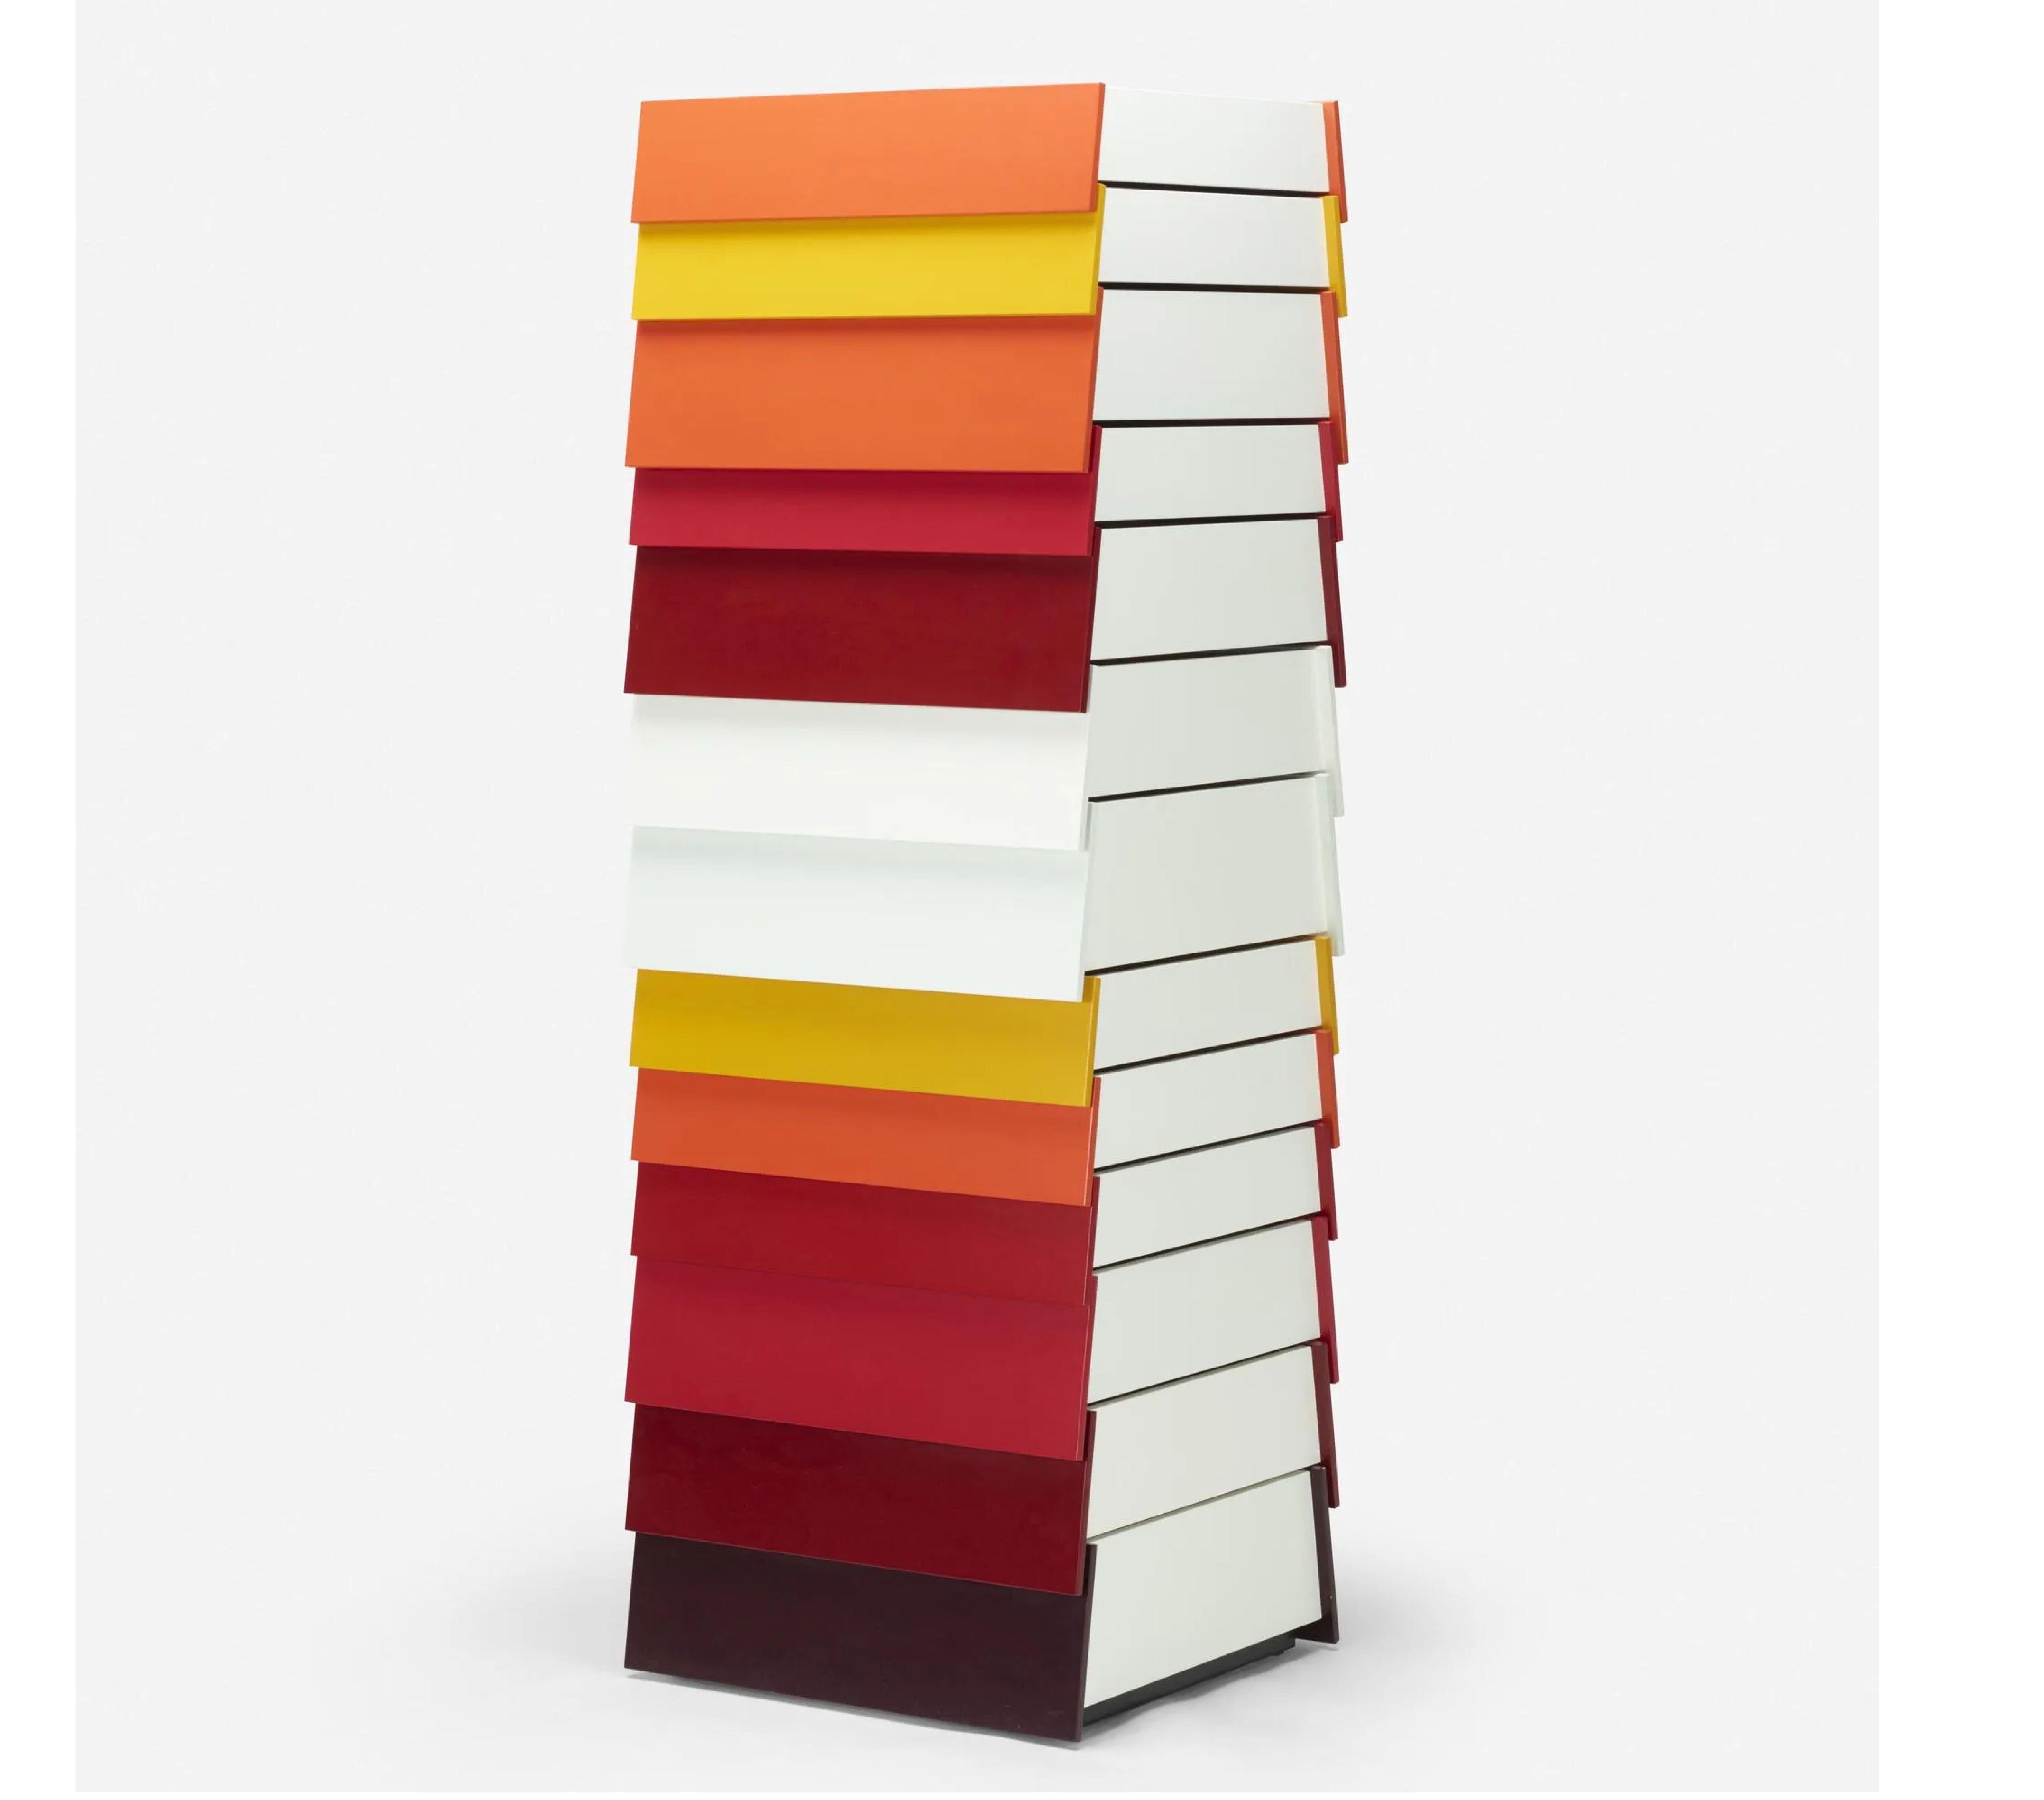 British Red Stack Cabinet by Shay Alkalay and Raw Edges, Established & Sons, UK, 2008